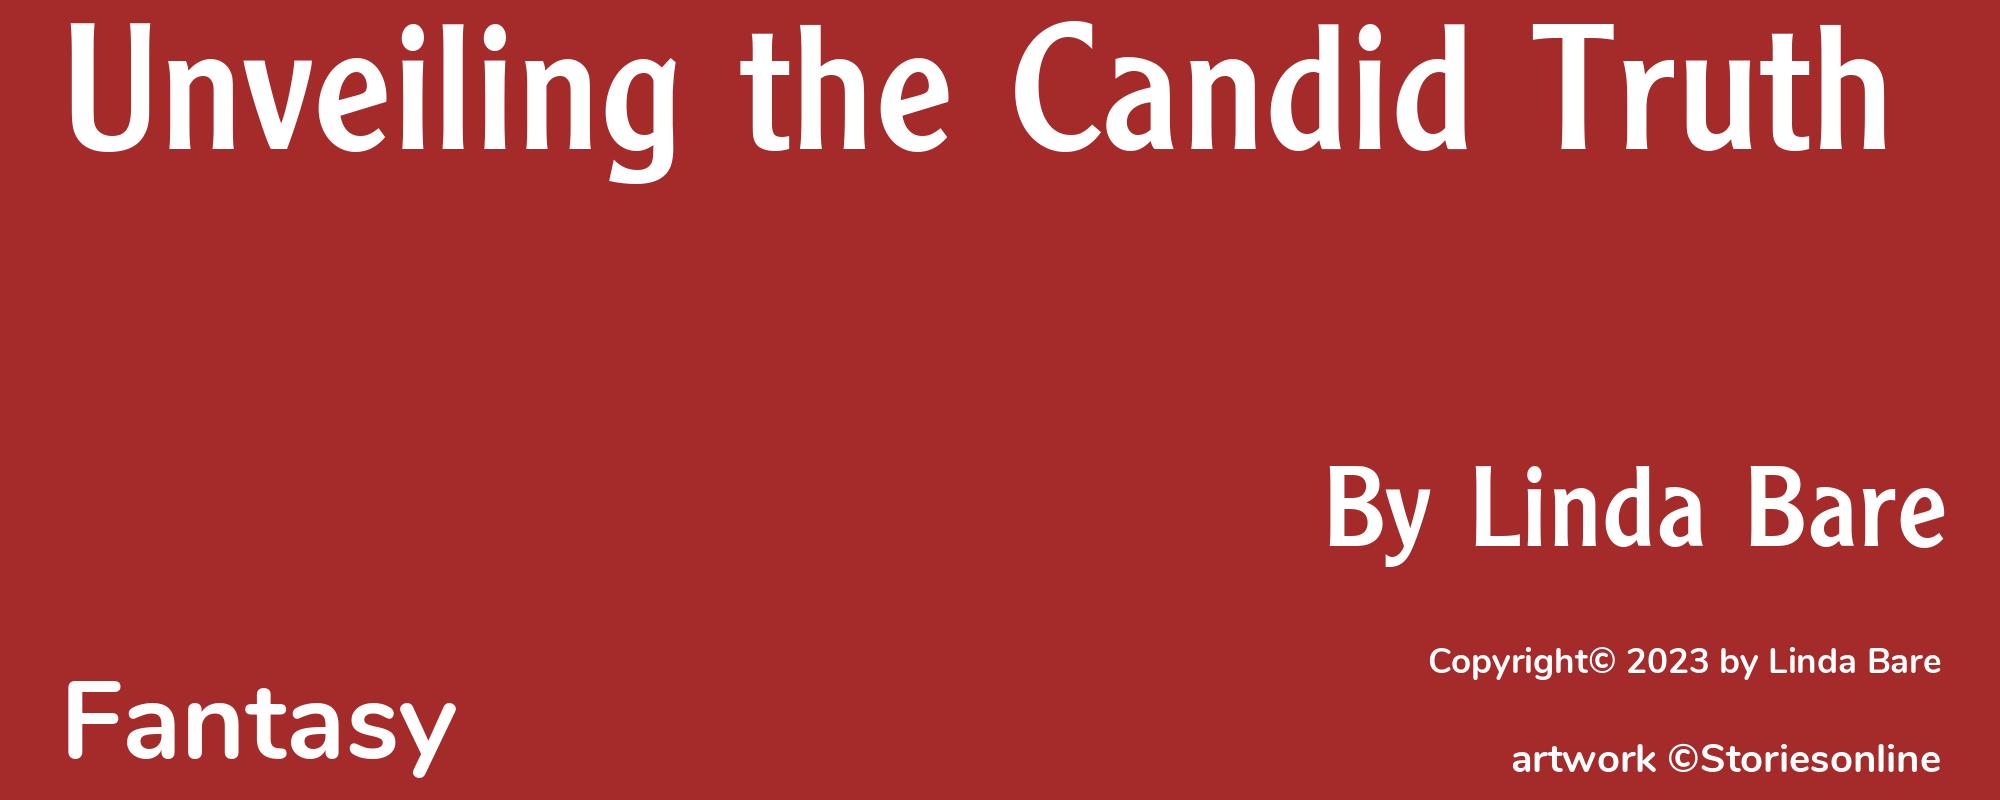 Unveiling the Candid Truth - Cover